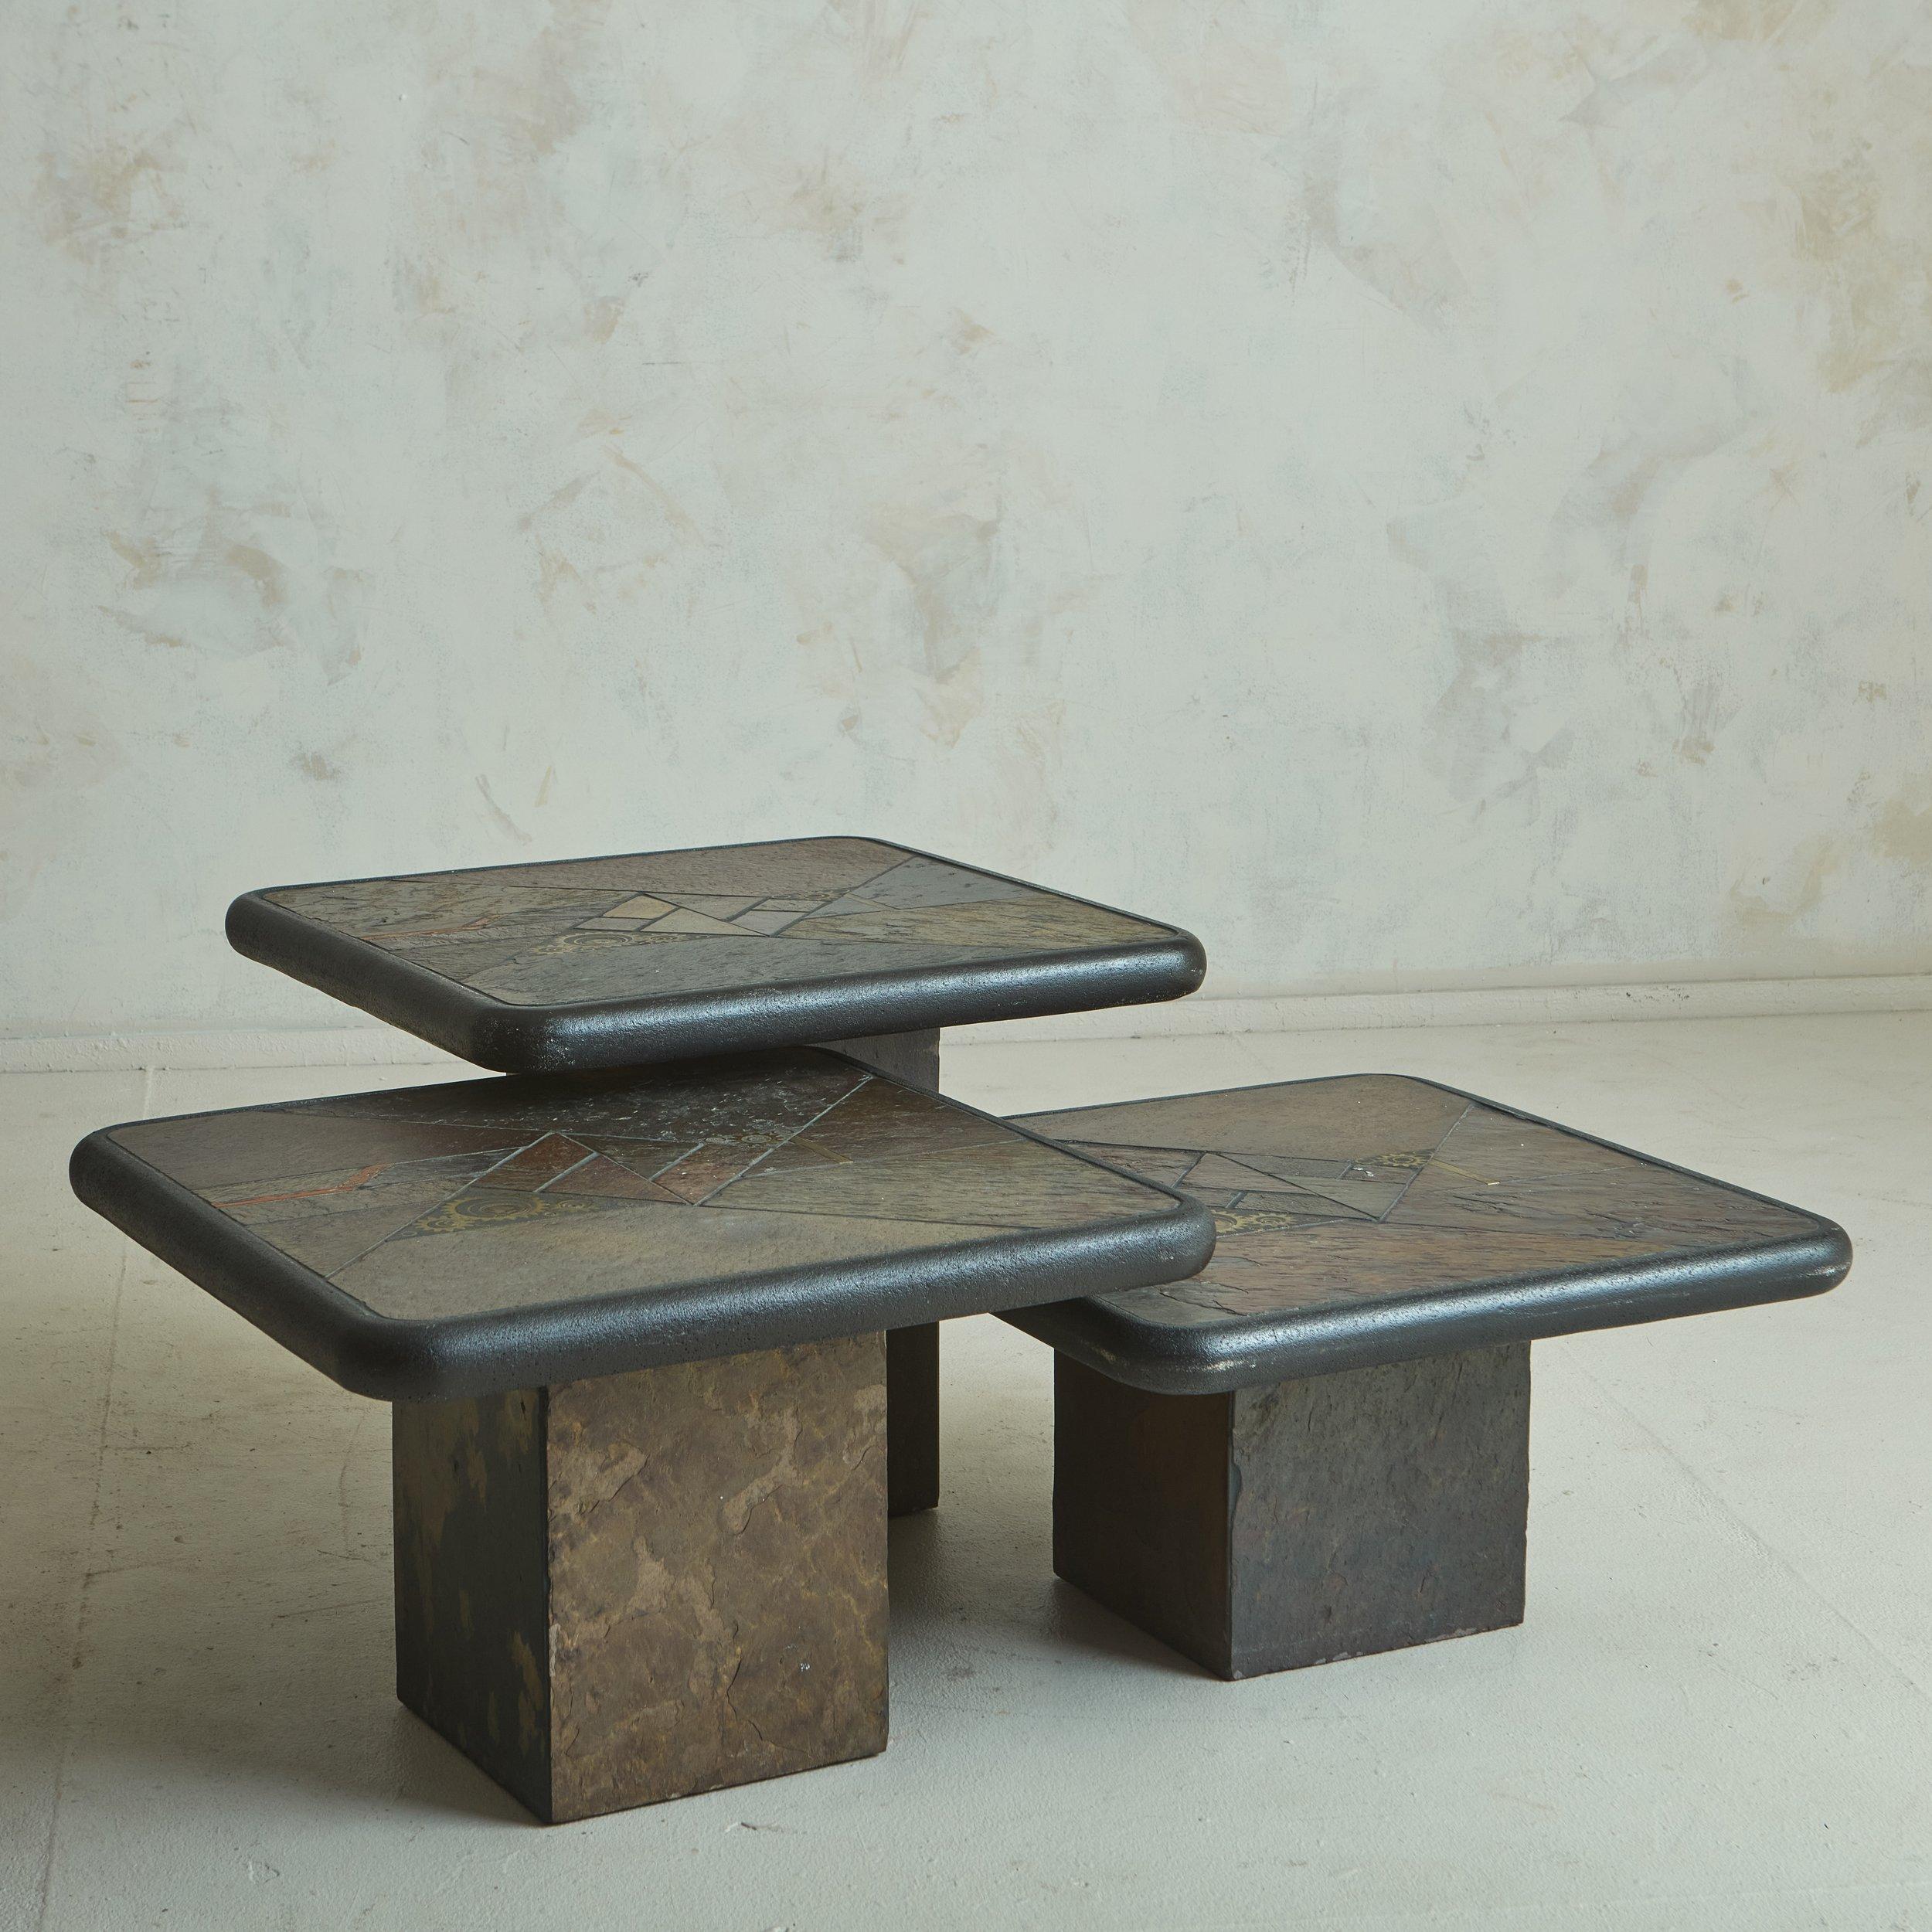 Late 20th Century Trio of Brutalist Mosaic Wood Base Nesting Tables by Paul Kingma for Kneip